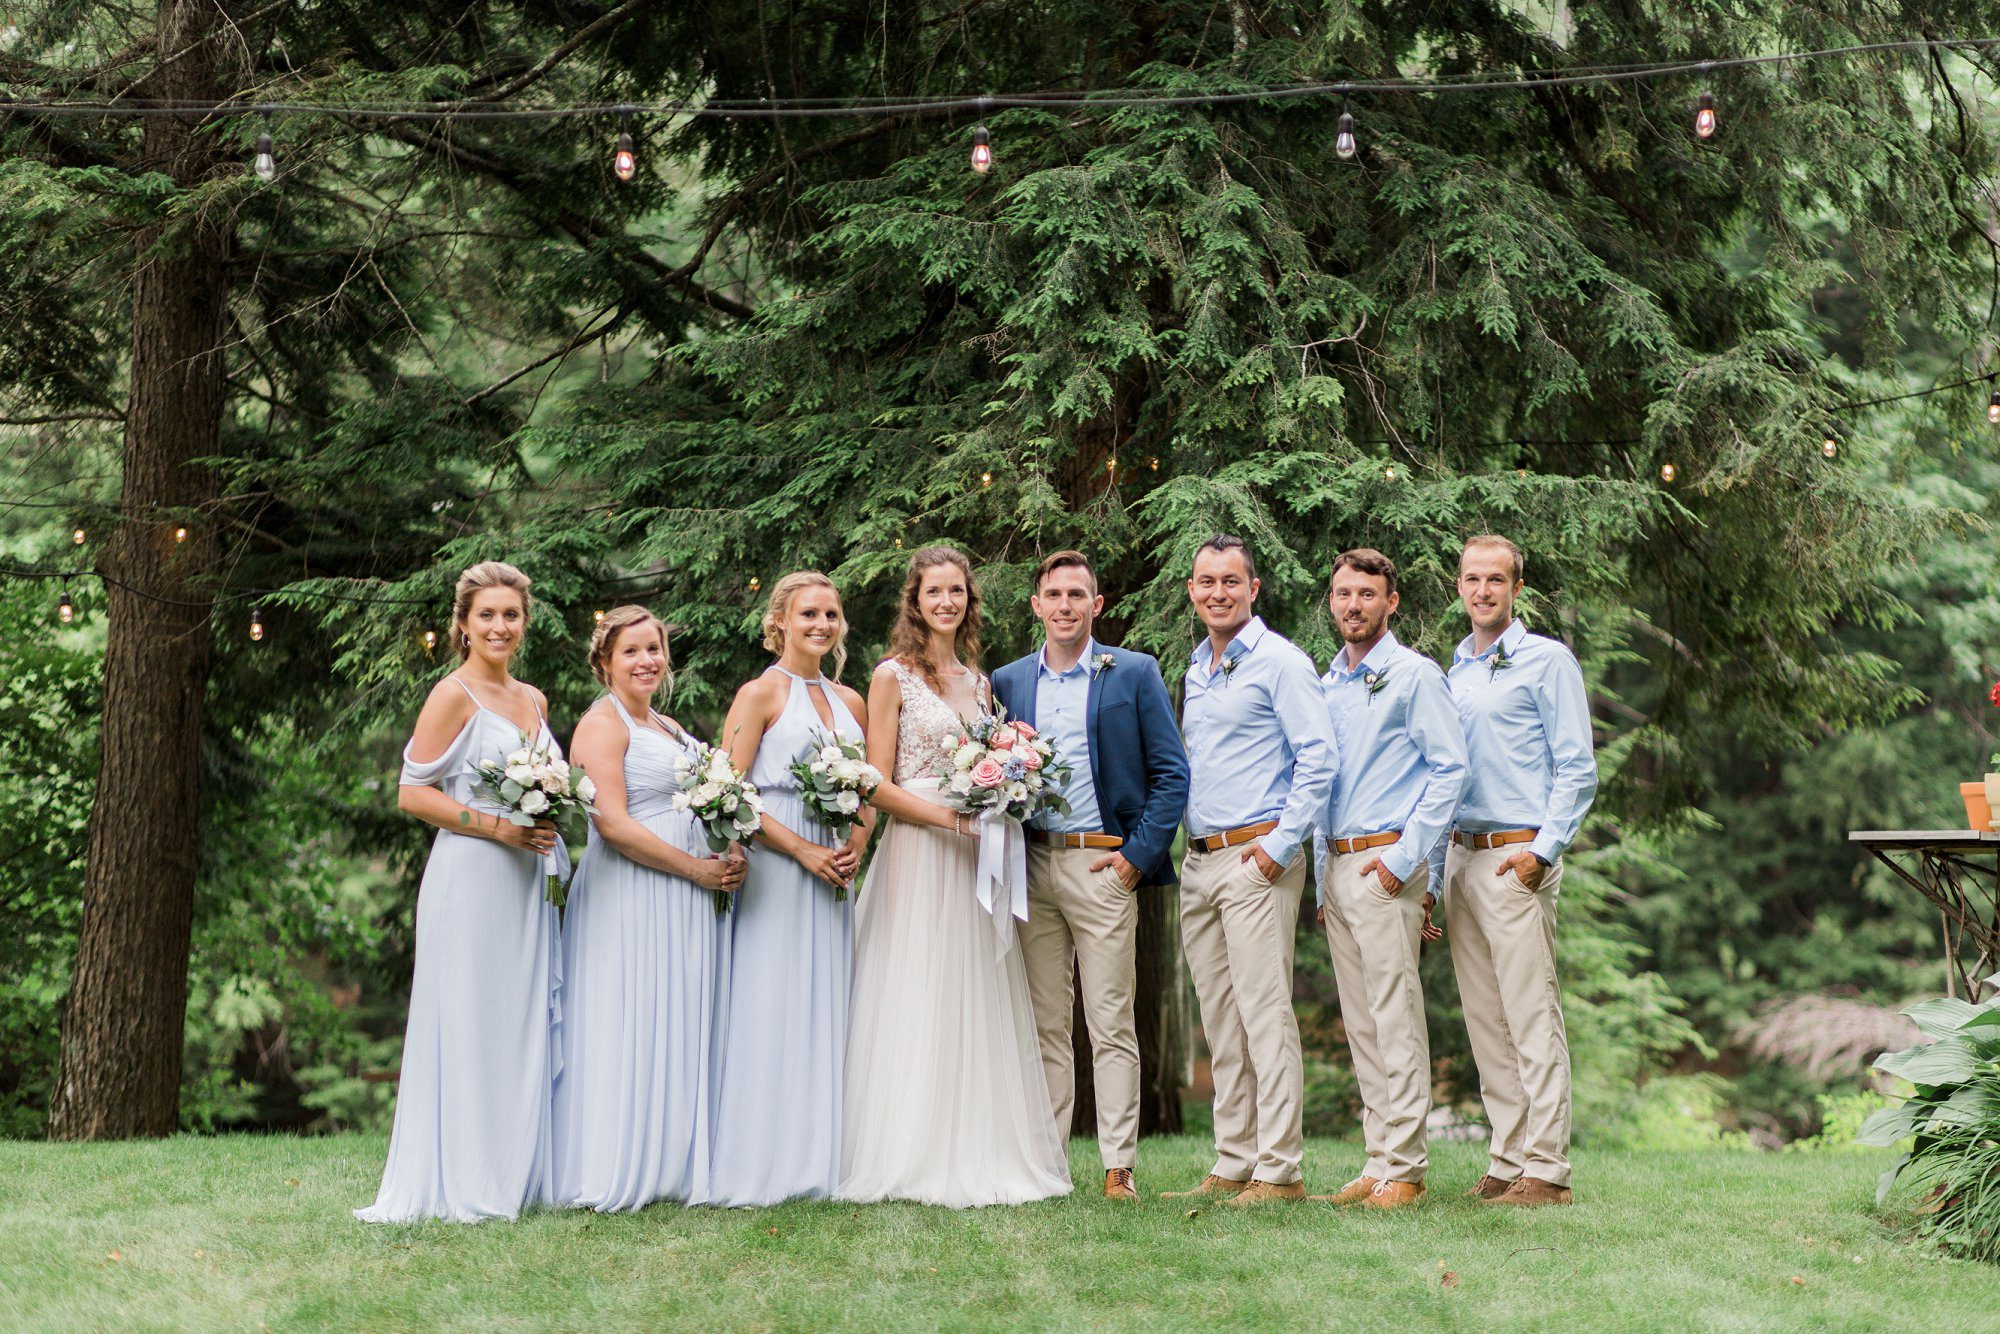 Summer wedding at family home in New Hampshire